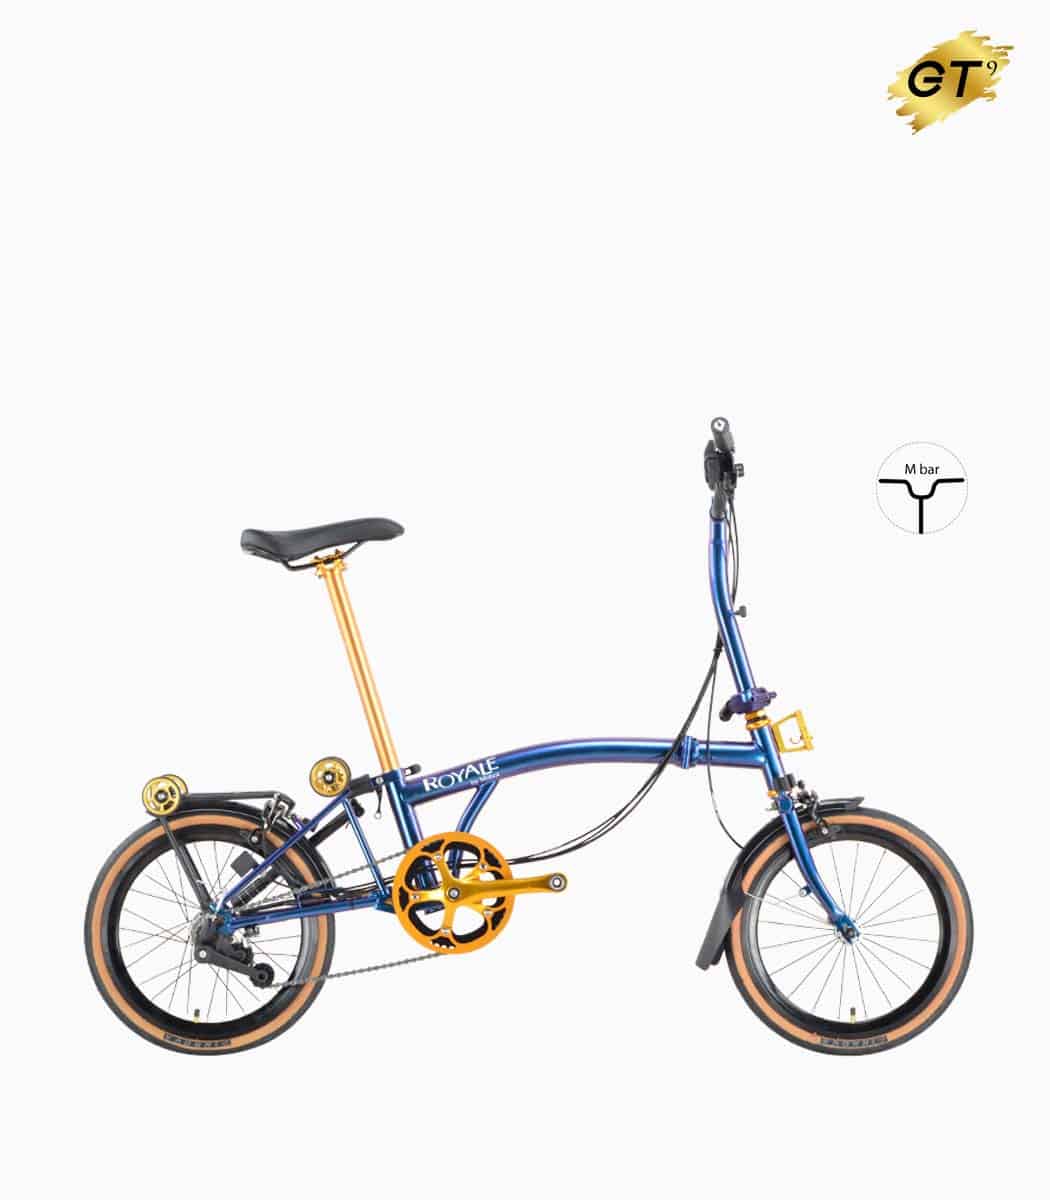 MOBOT ROYALE GT M9 (MILKY WAY) foldable bicycle gold edition M-bar with tanwall tyres high profile rim right